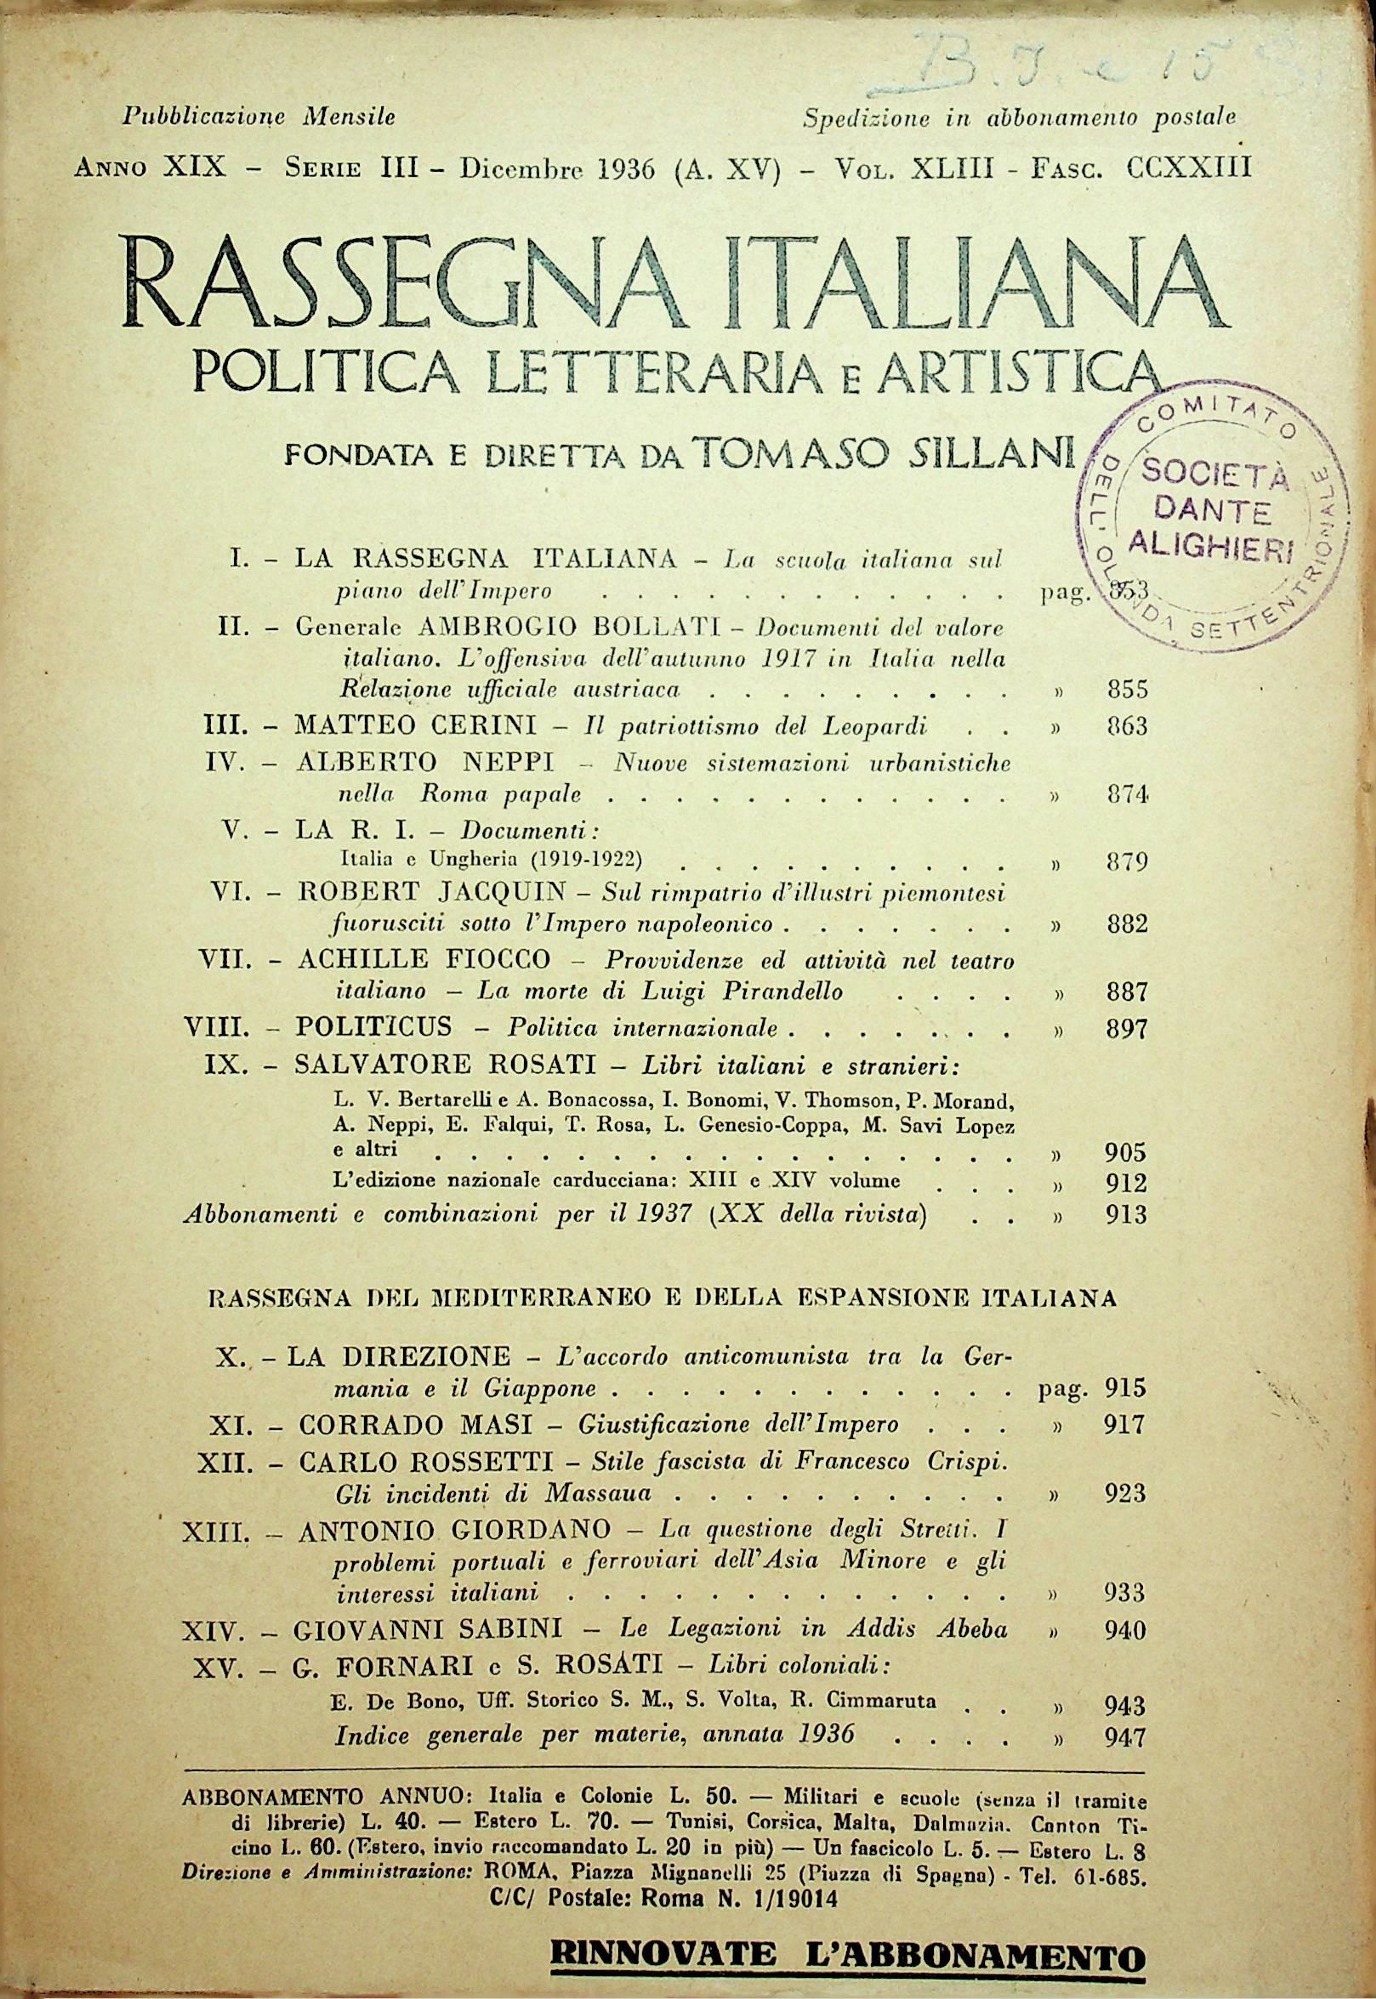 Front Covers of some of the periodicals and magazines held at the Bibliotheca Italiana with the stamp of La Dante.